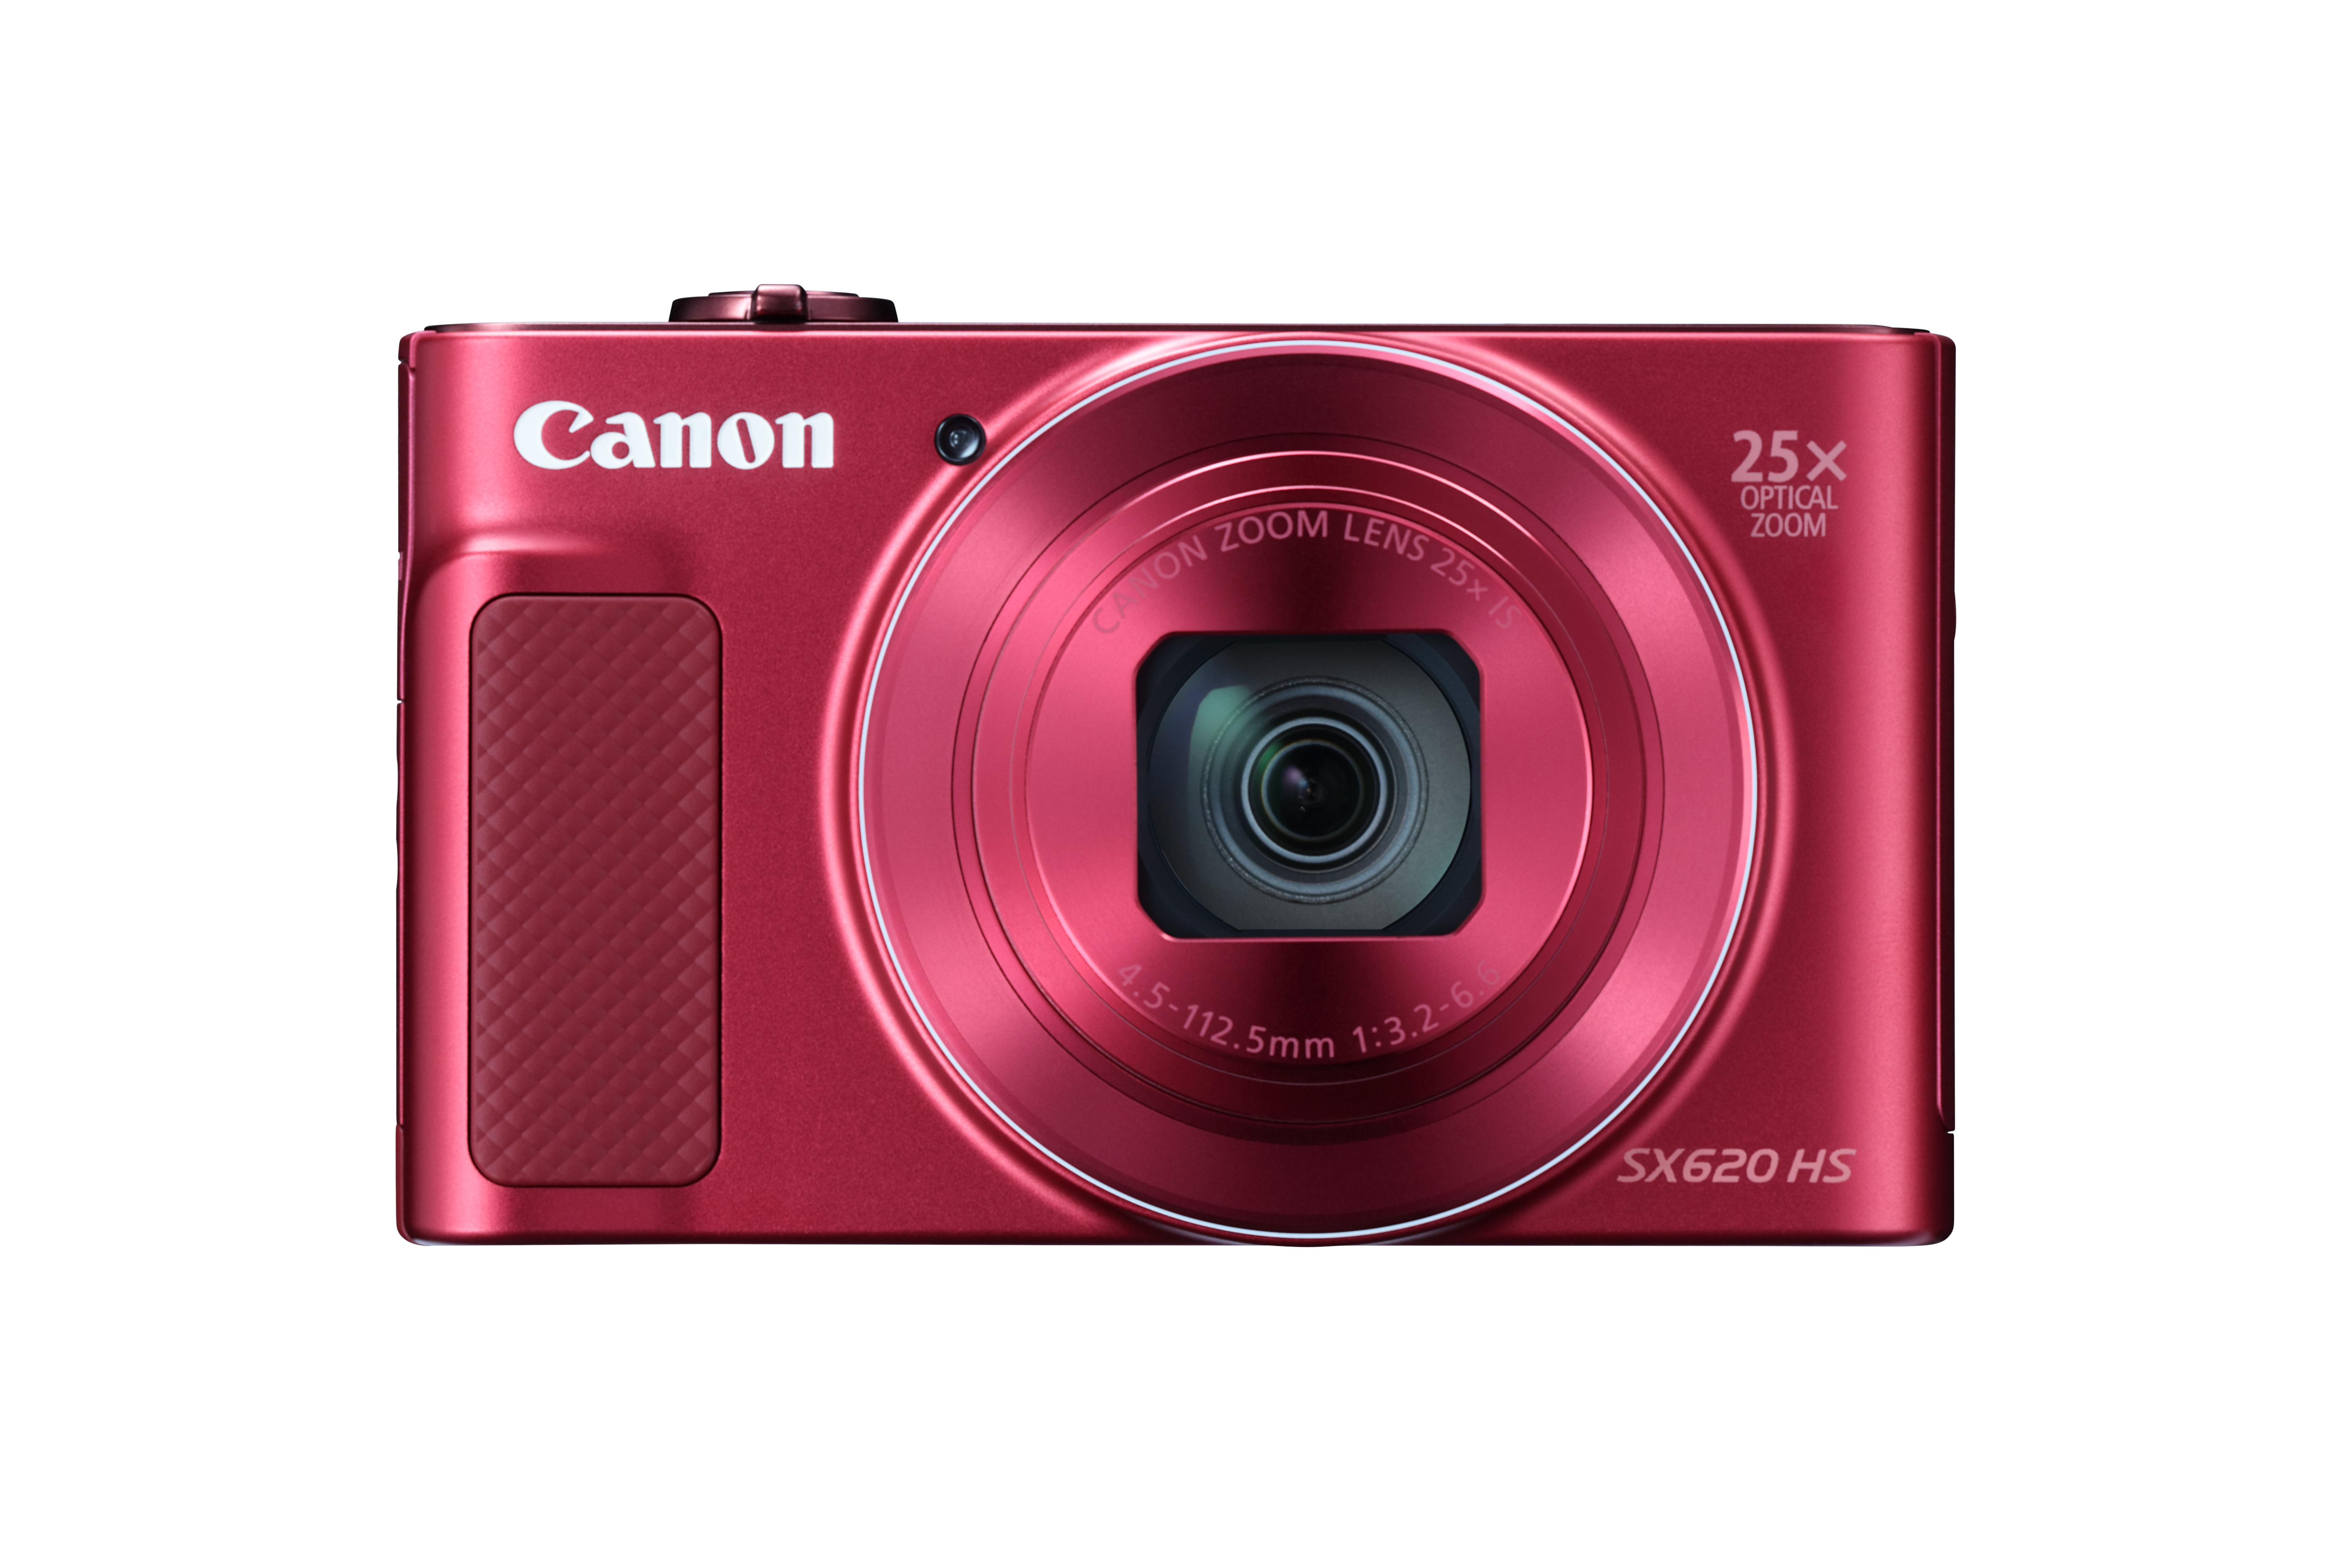 Canon PowerShot SX620 HS - Digital camera - compact - 20.2 MP - 1080p / 30 fps - 25x optical zoom - Wi-Fi, NFC - red